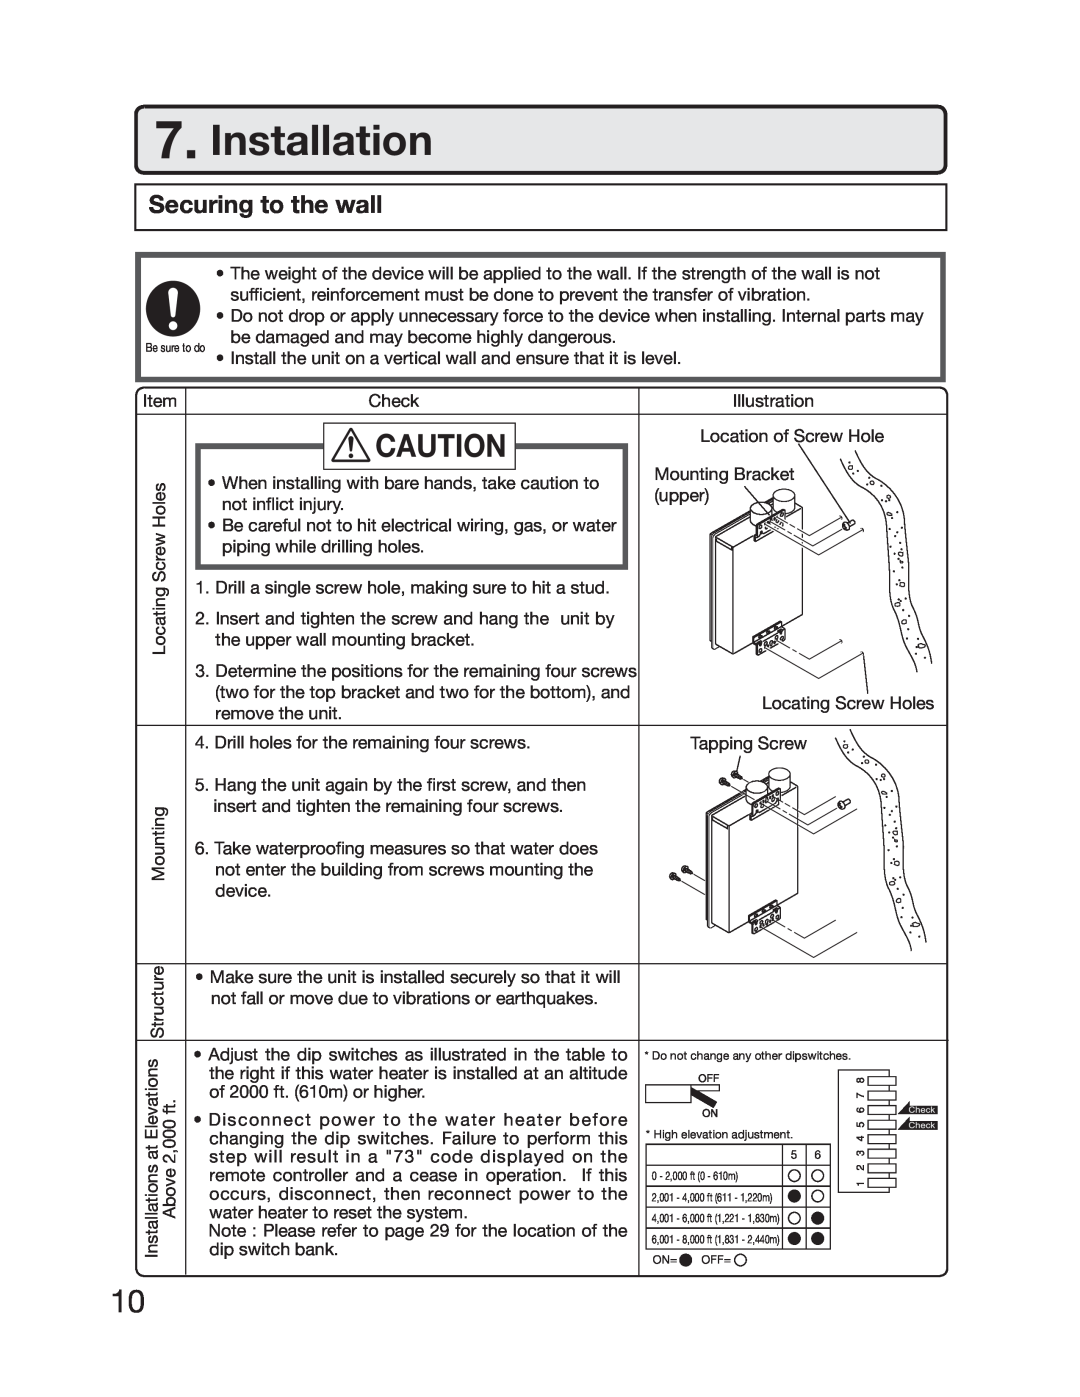 Electrolux 5995615357 installation manual Installation, Securing to the wall 